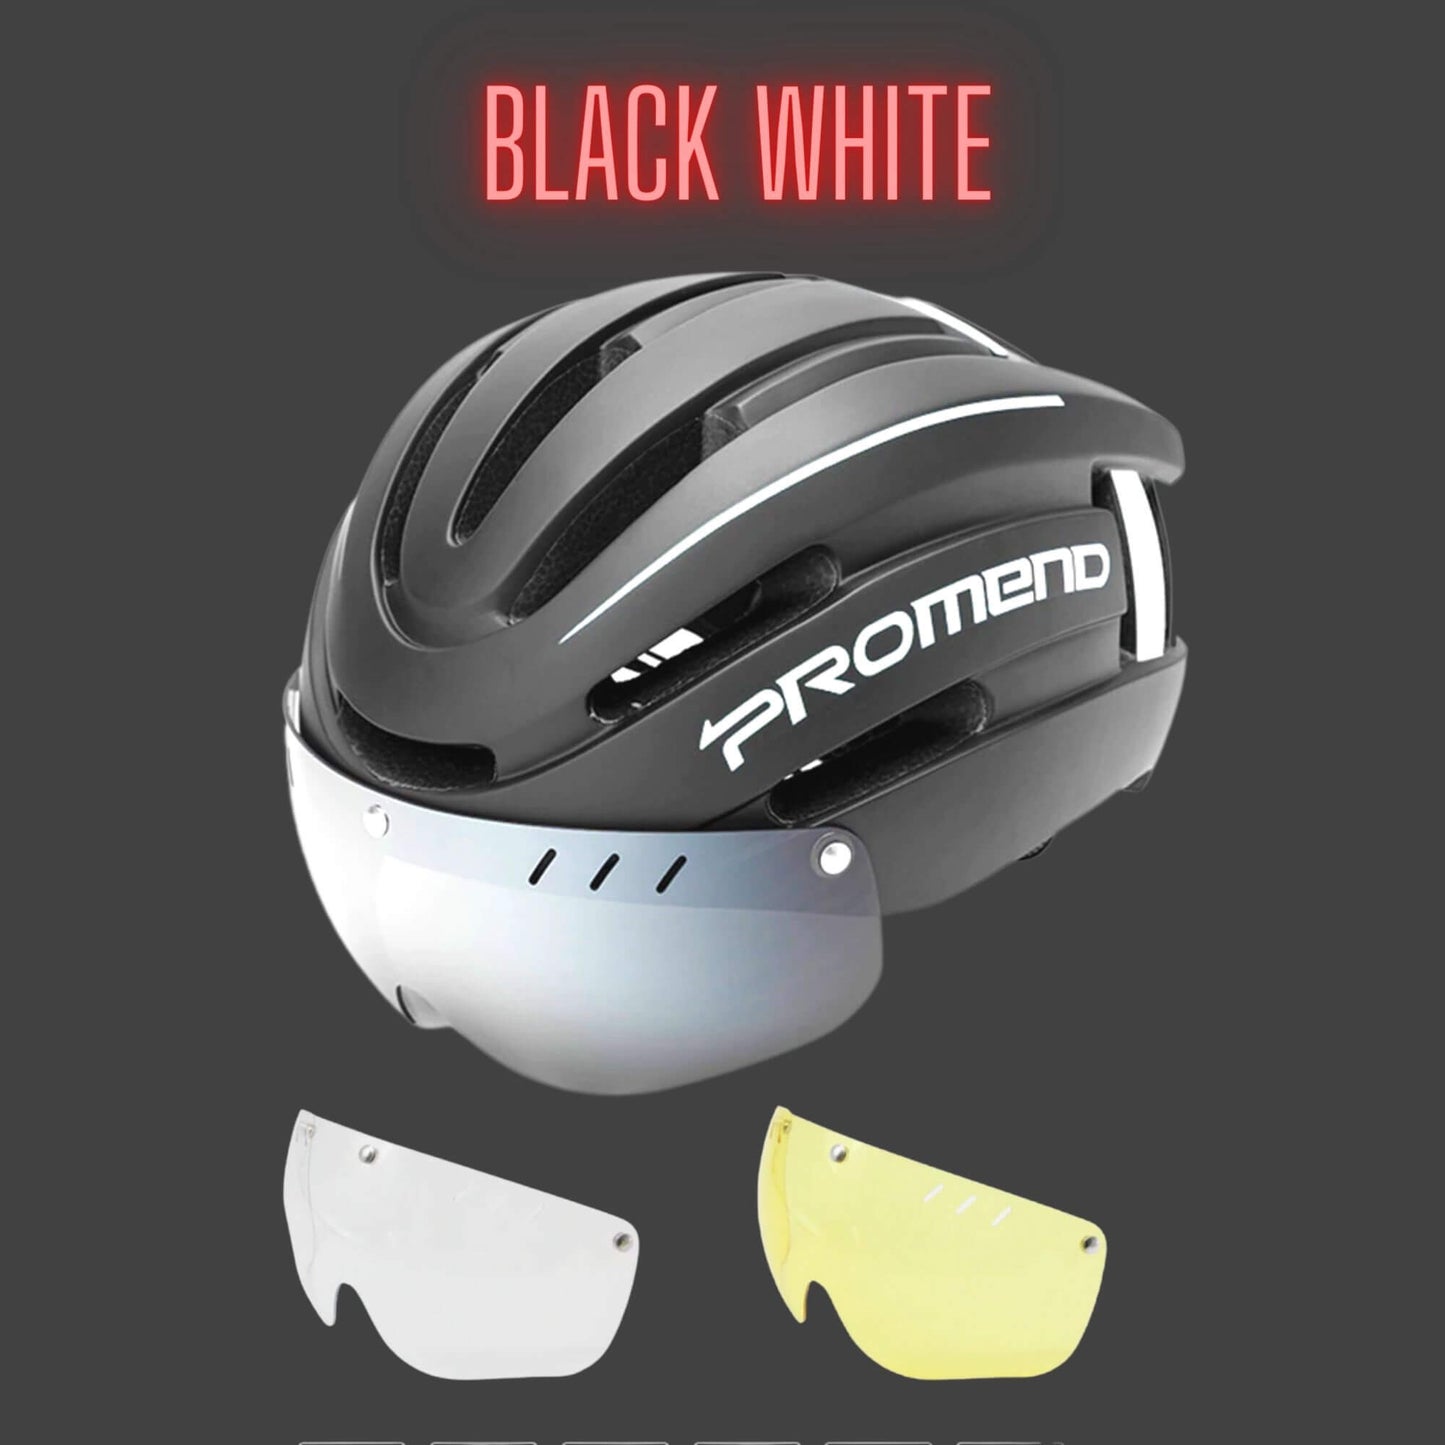 Bike Helmet With Led Lights. Detachable Magnetic Sun Goggles. Rechargeable, Comfortable. 9 Modes For Tail Lights. Shock Proof Cushioning.